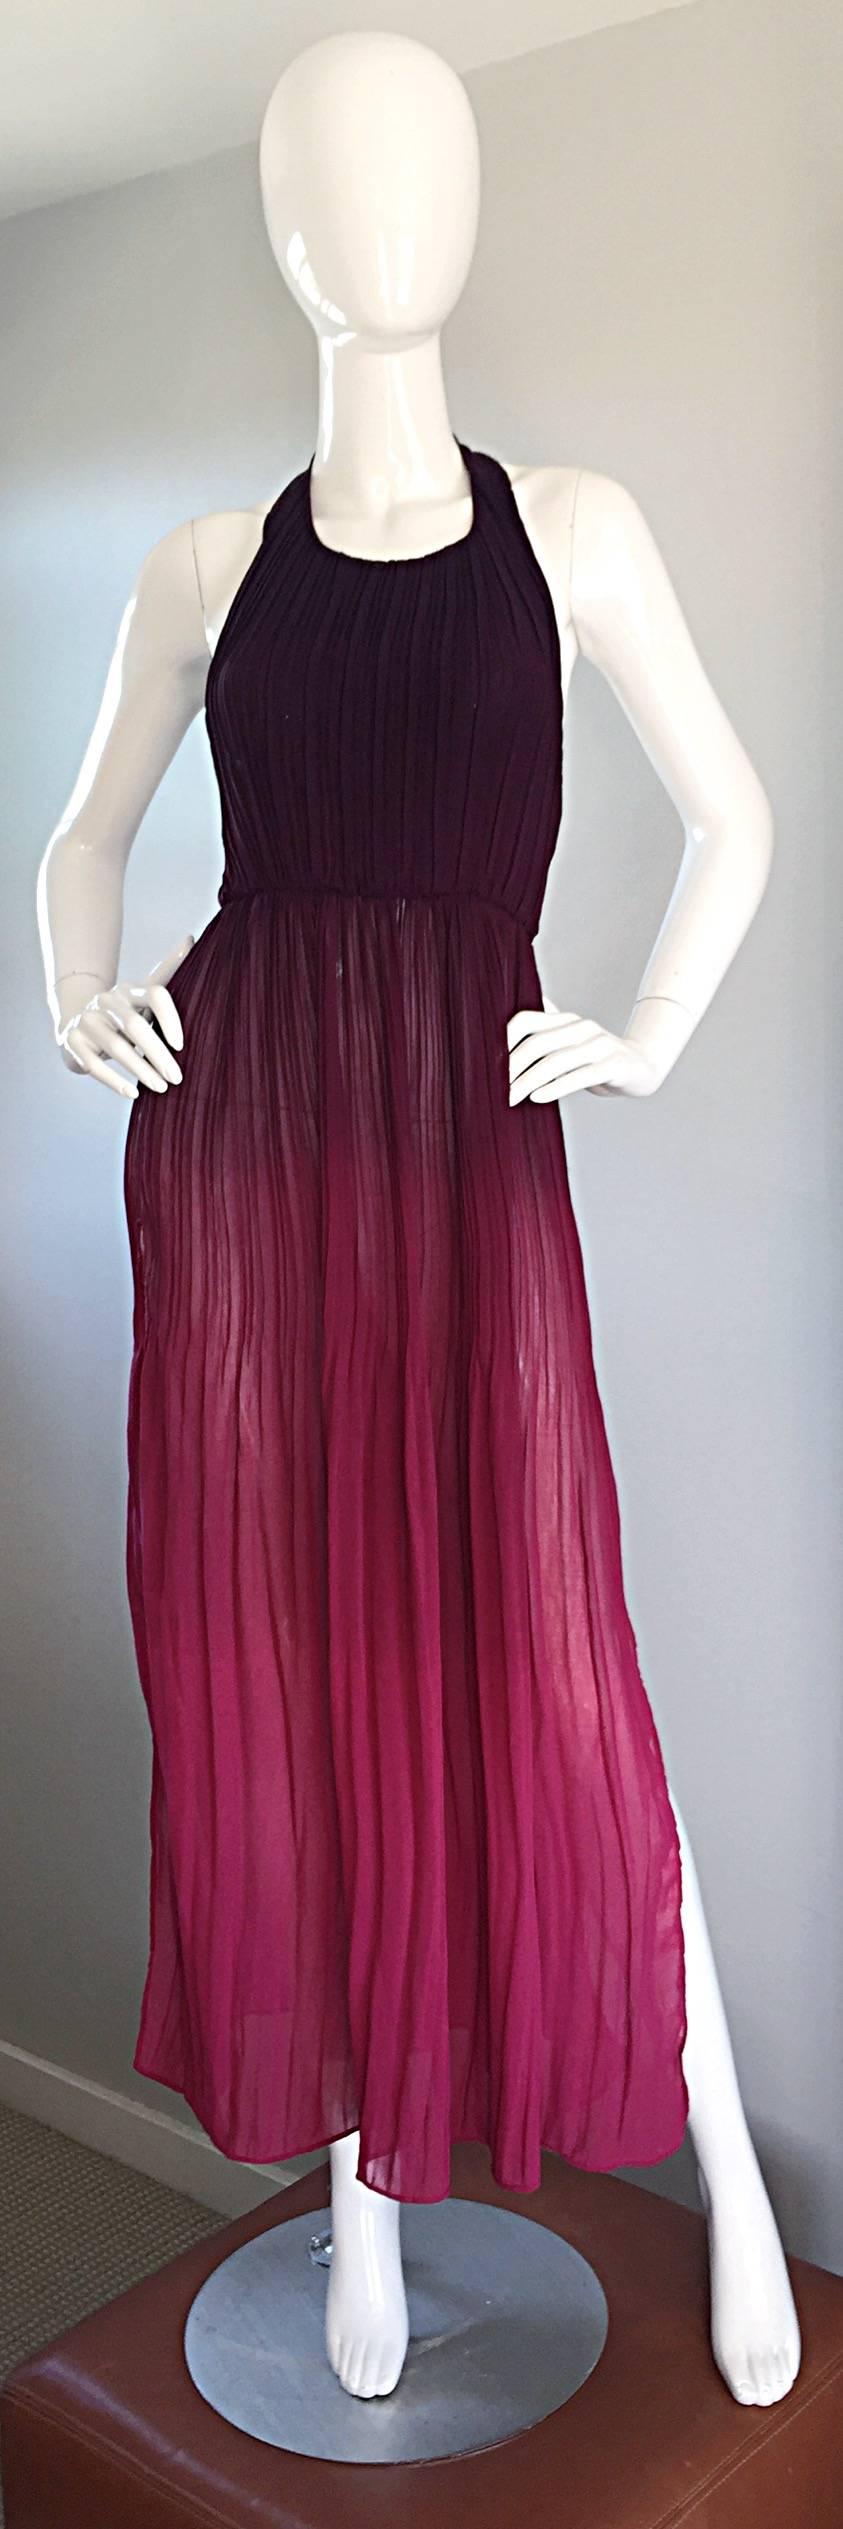 Sexy 70s burgundy ombre halter maxi dress! Features are dark purple / burgundy at bodice, gradually evolving into a beautiful raspberry pink color. Flattering cut, with slits at both sides. Halter style, with button closure at back neck. Looks great